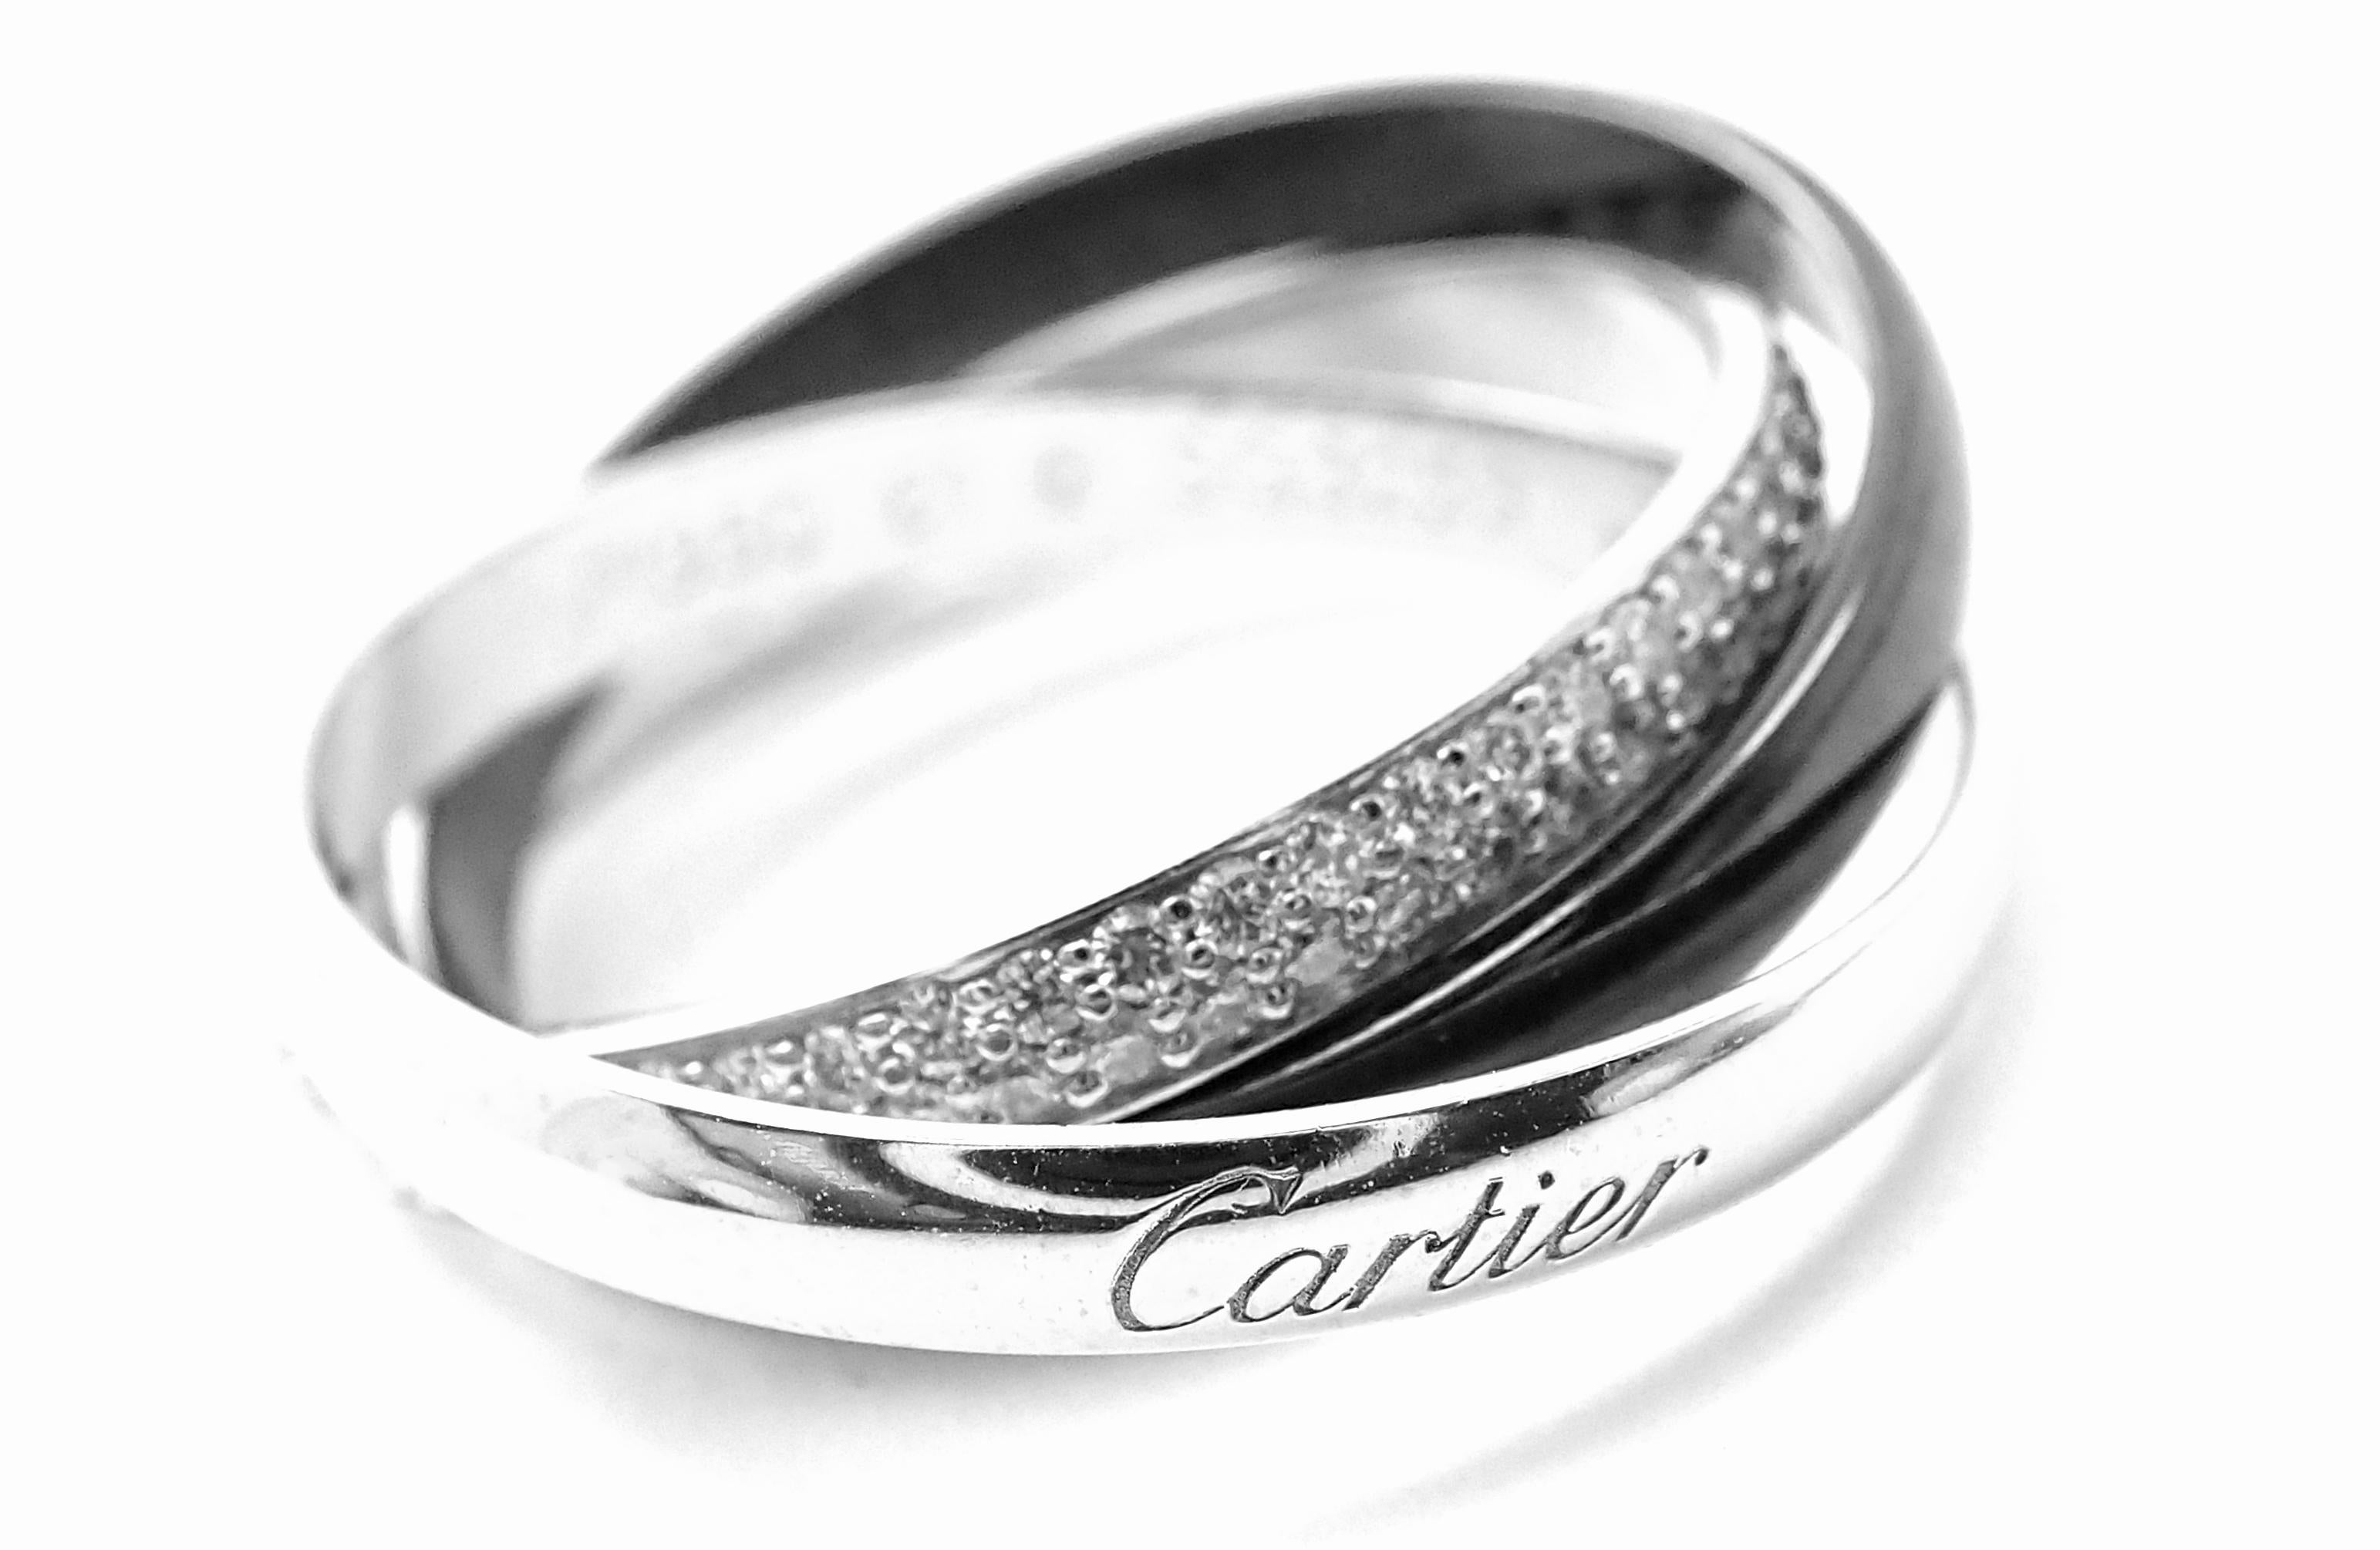 Gorgeous Cartier Diamond Three-Band Trinity Ring in Platinum, Ceramic, and 18k White Gold. 
With 100 Round Brilliant cut diamonds VVS1 clarity, F-H color total weight approx. .45ct
This beautiful ring comes with an original Cartier box and Cartier